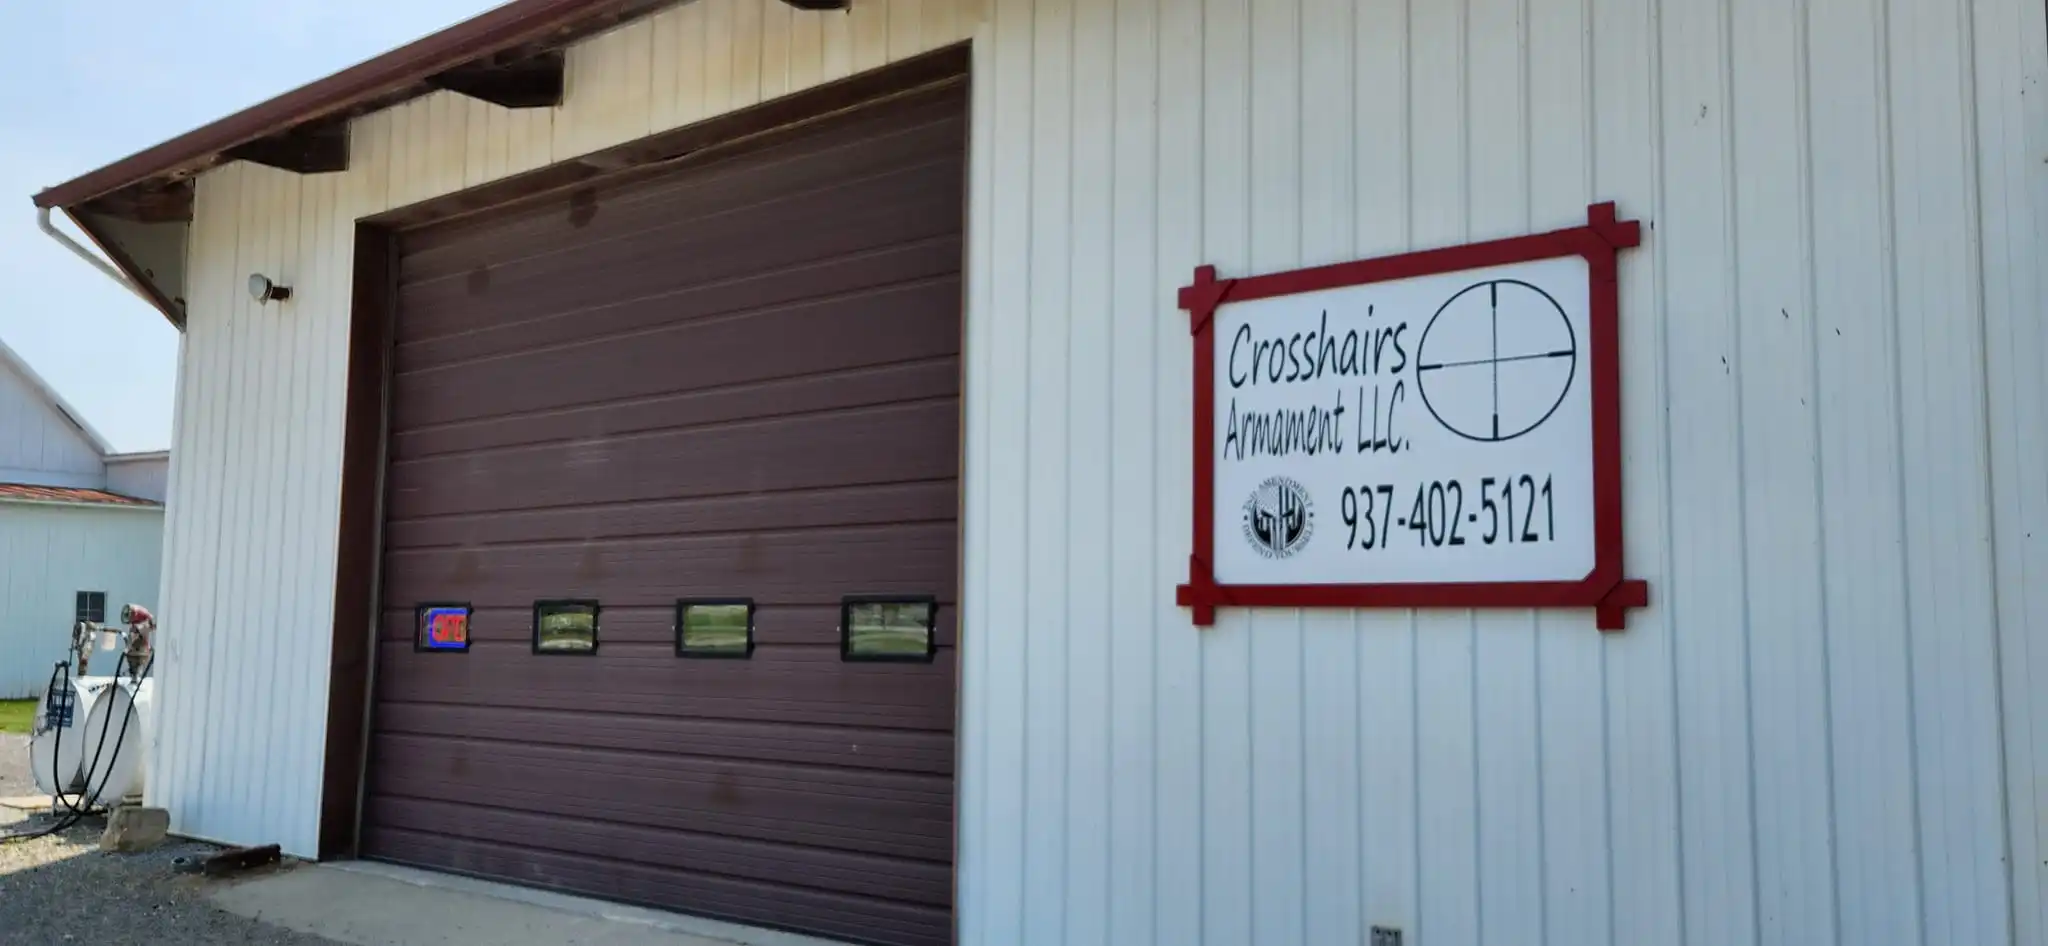 Crosshairs Armament LLC storefront with a sign displaying contact information.